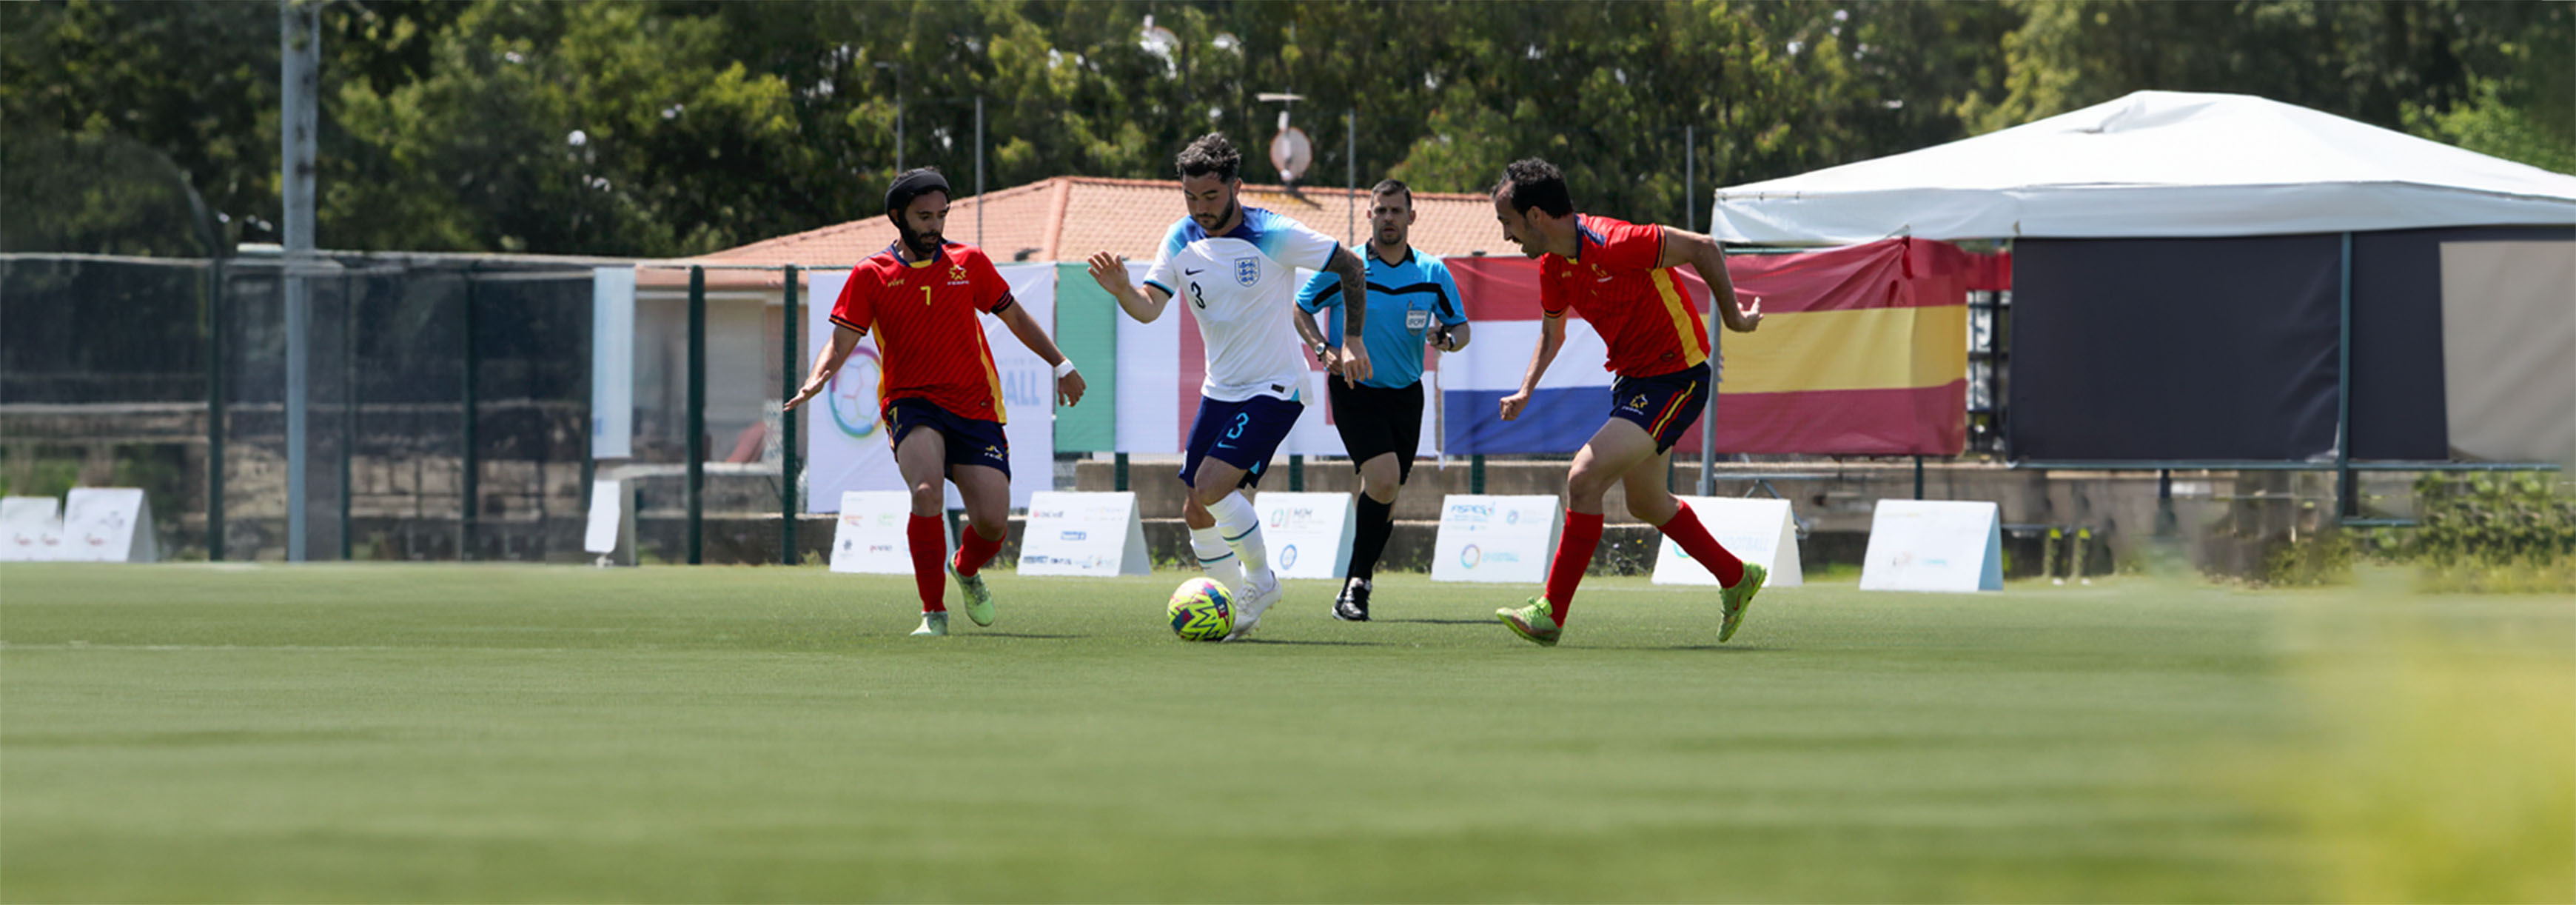 England CP's David Porcher runs with the ball between two defenders during the IFCPF European Championship match between England CP and Spain.